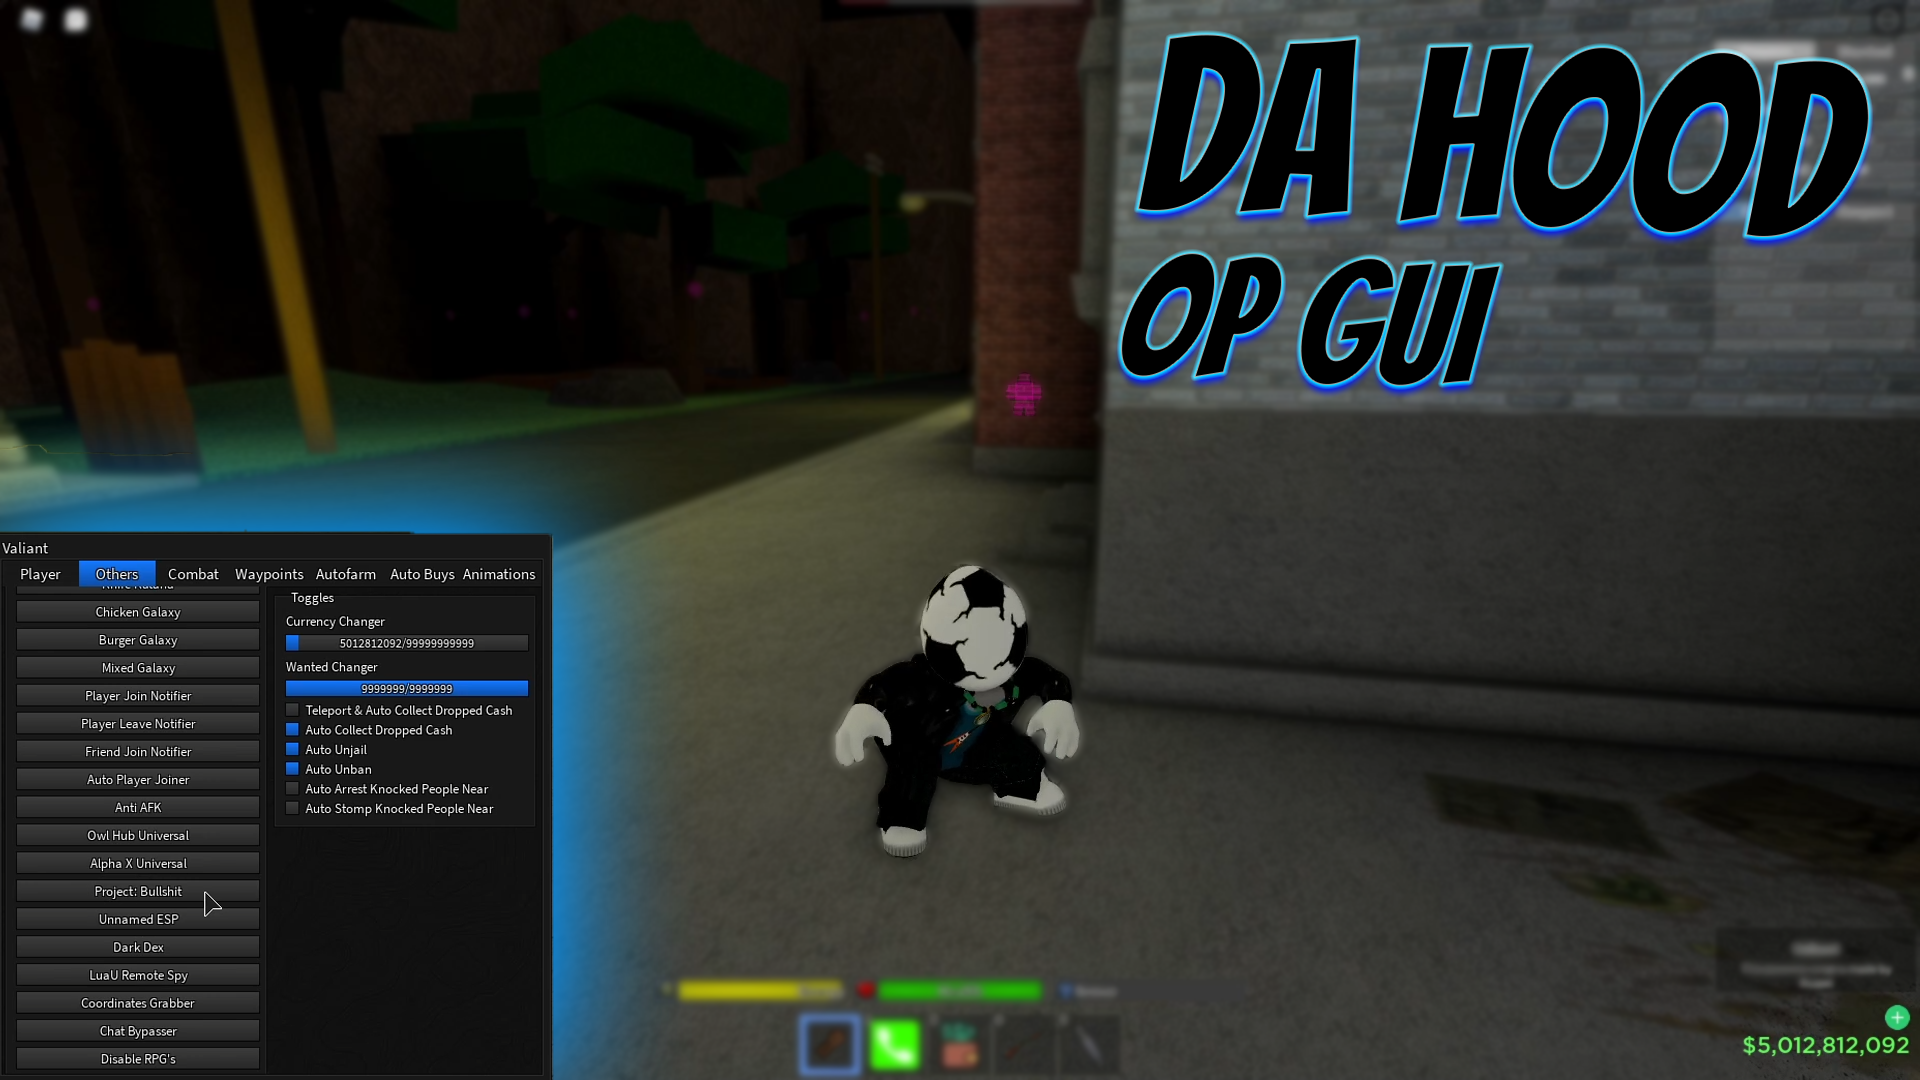 New Op Da Hood Gui - what does remote spy do in roblox hack